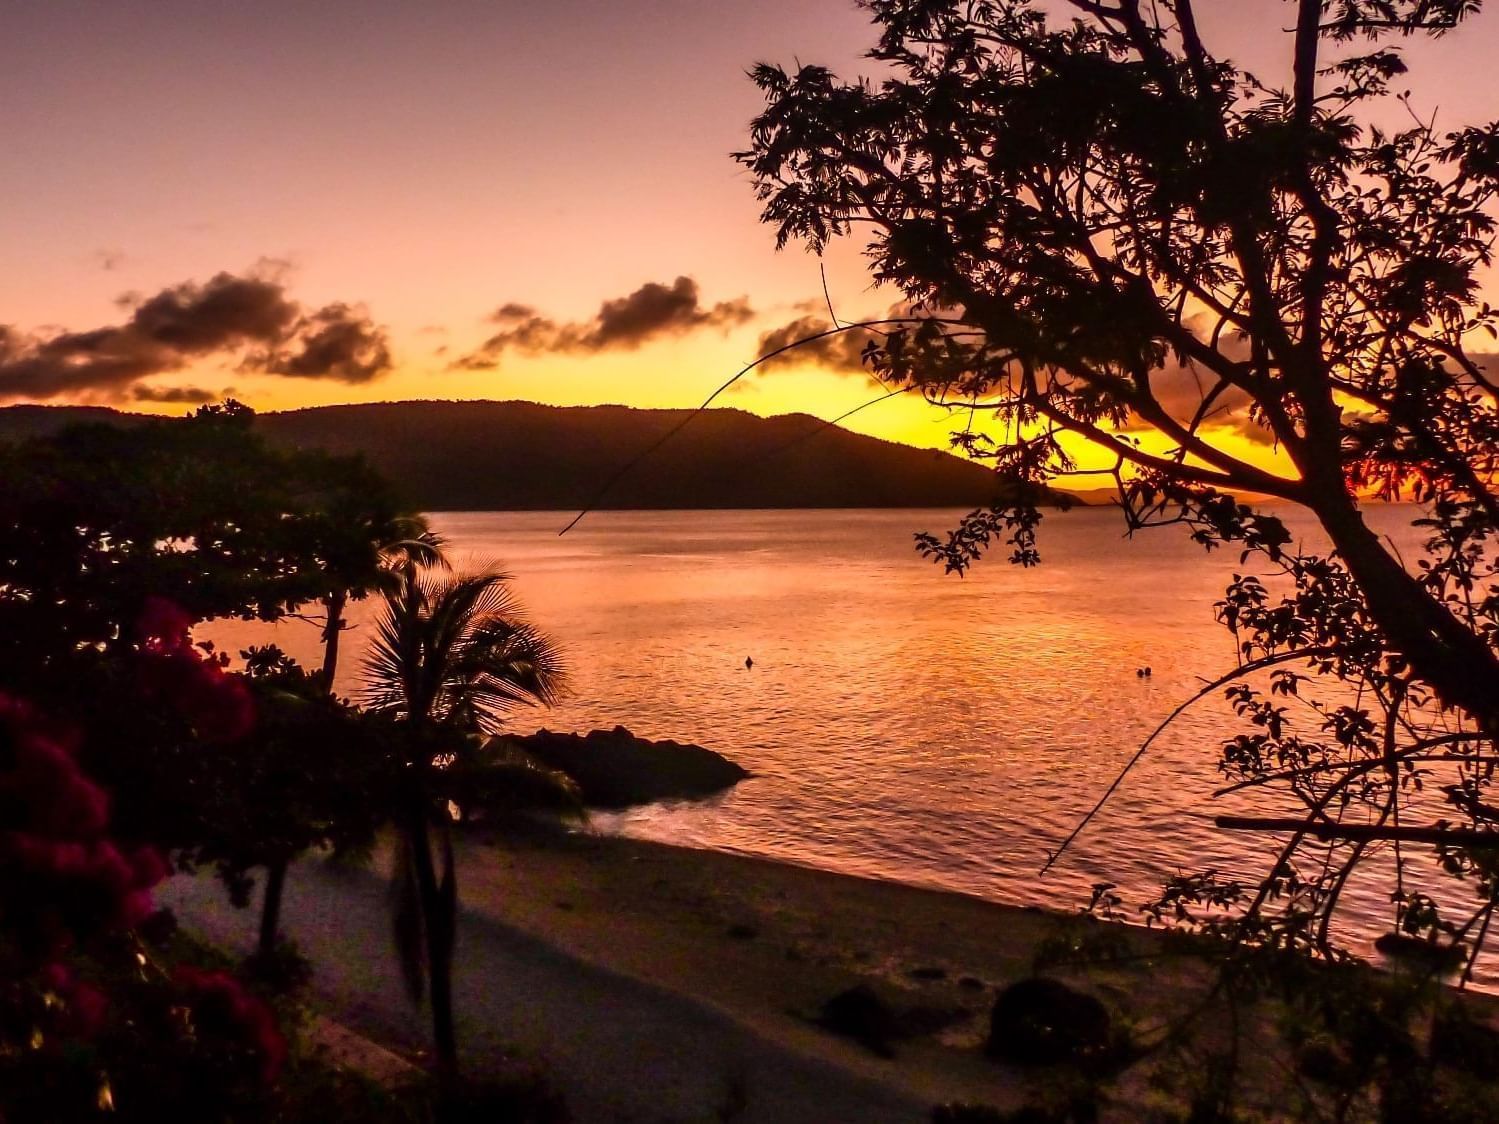 Beautiful Lovers Cove beach during sunset at Daydream Island